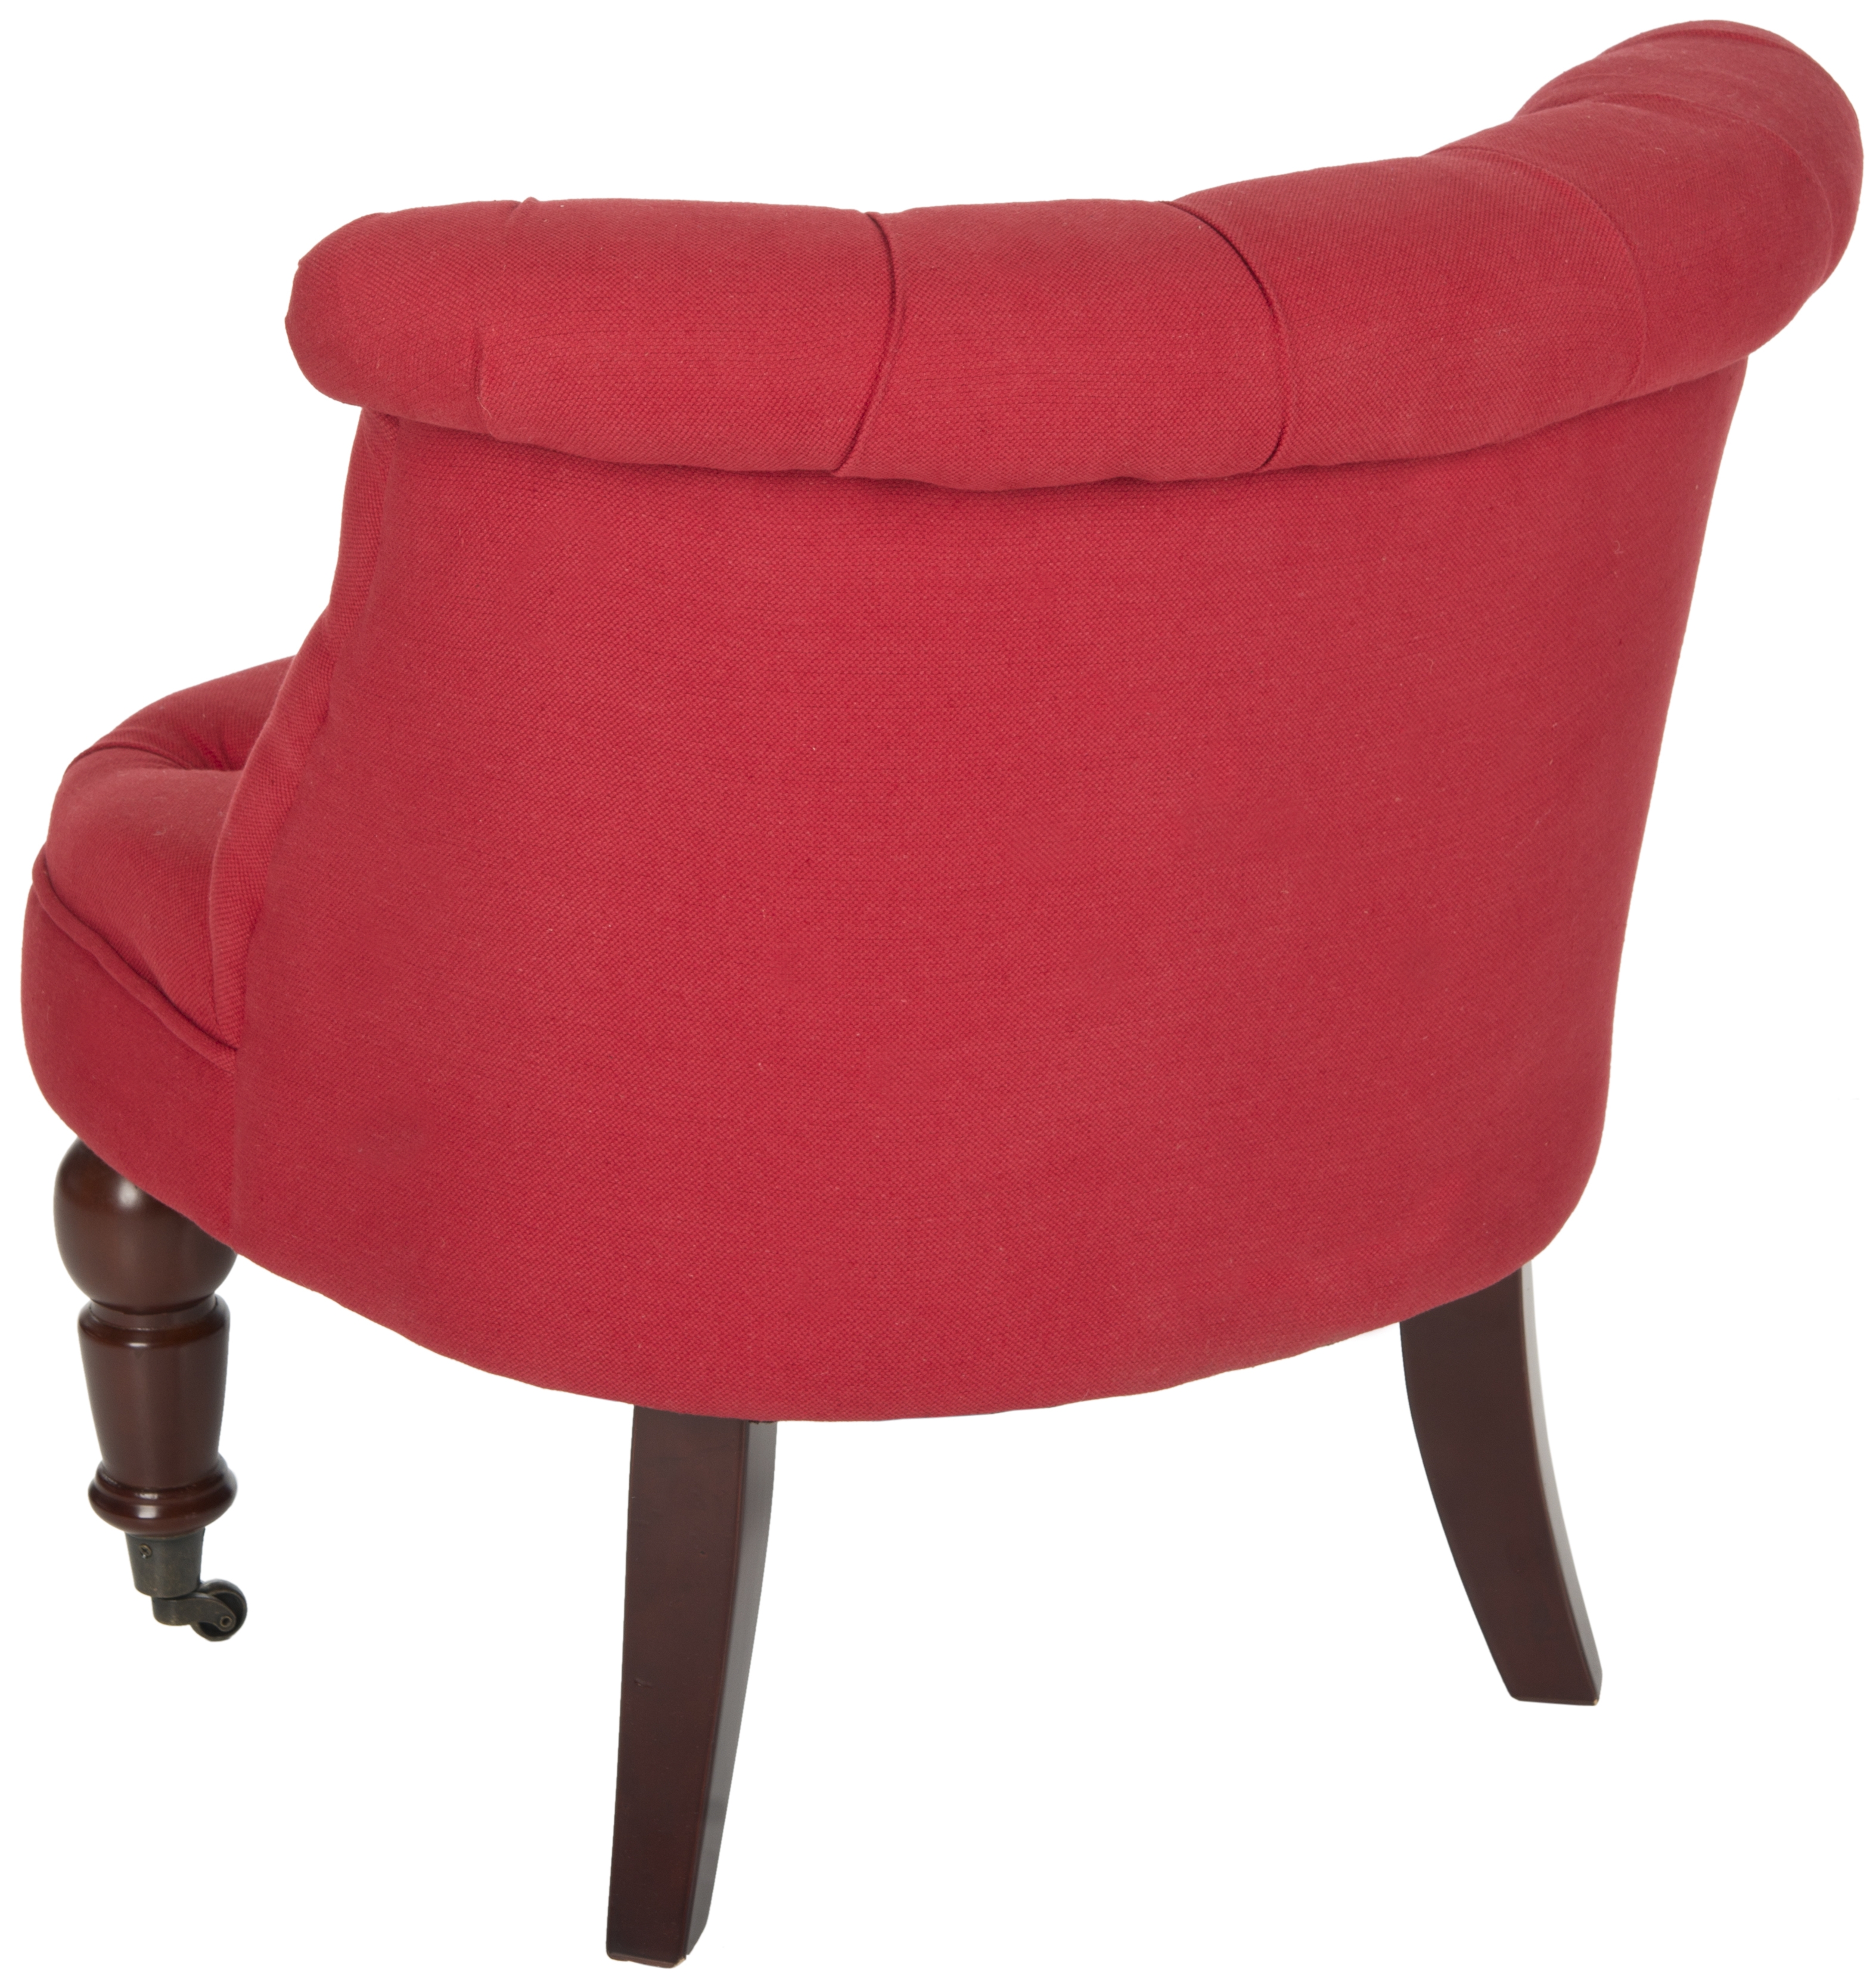 Carlin Tufted Chair - Cranberry/Cherry Mahogany - Arlo Home - Image 2